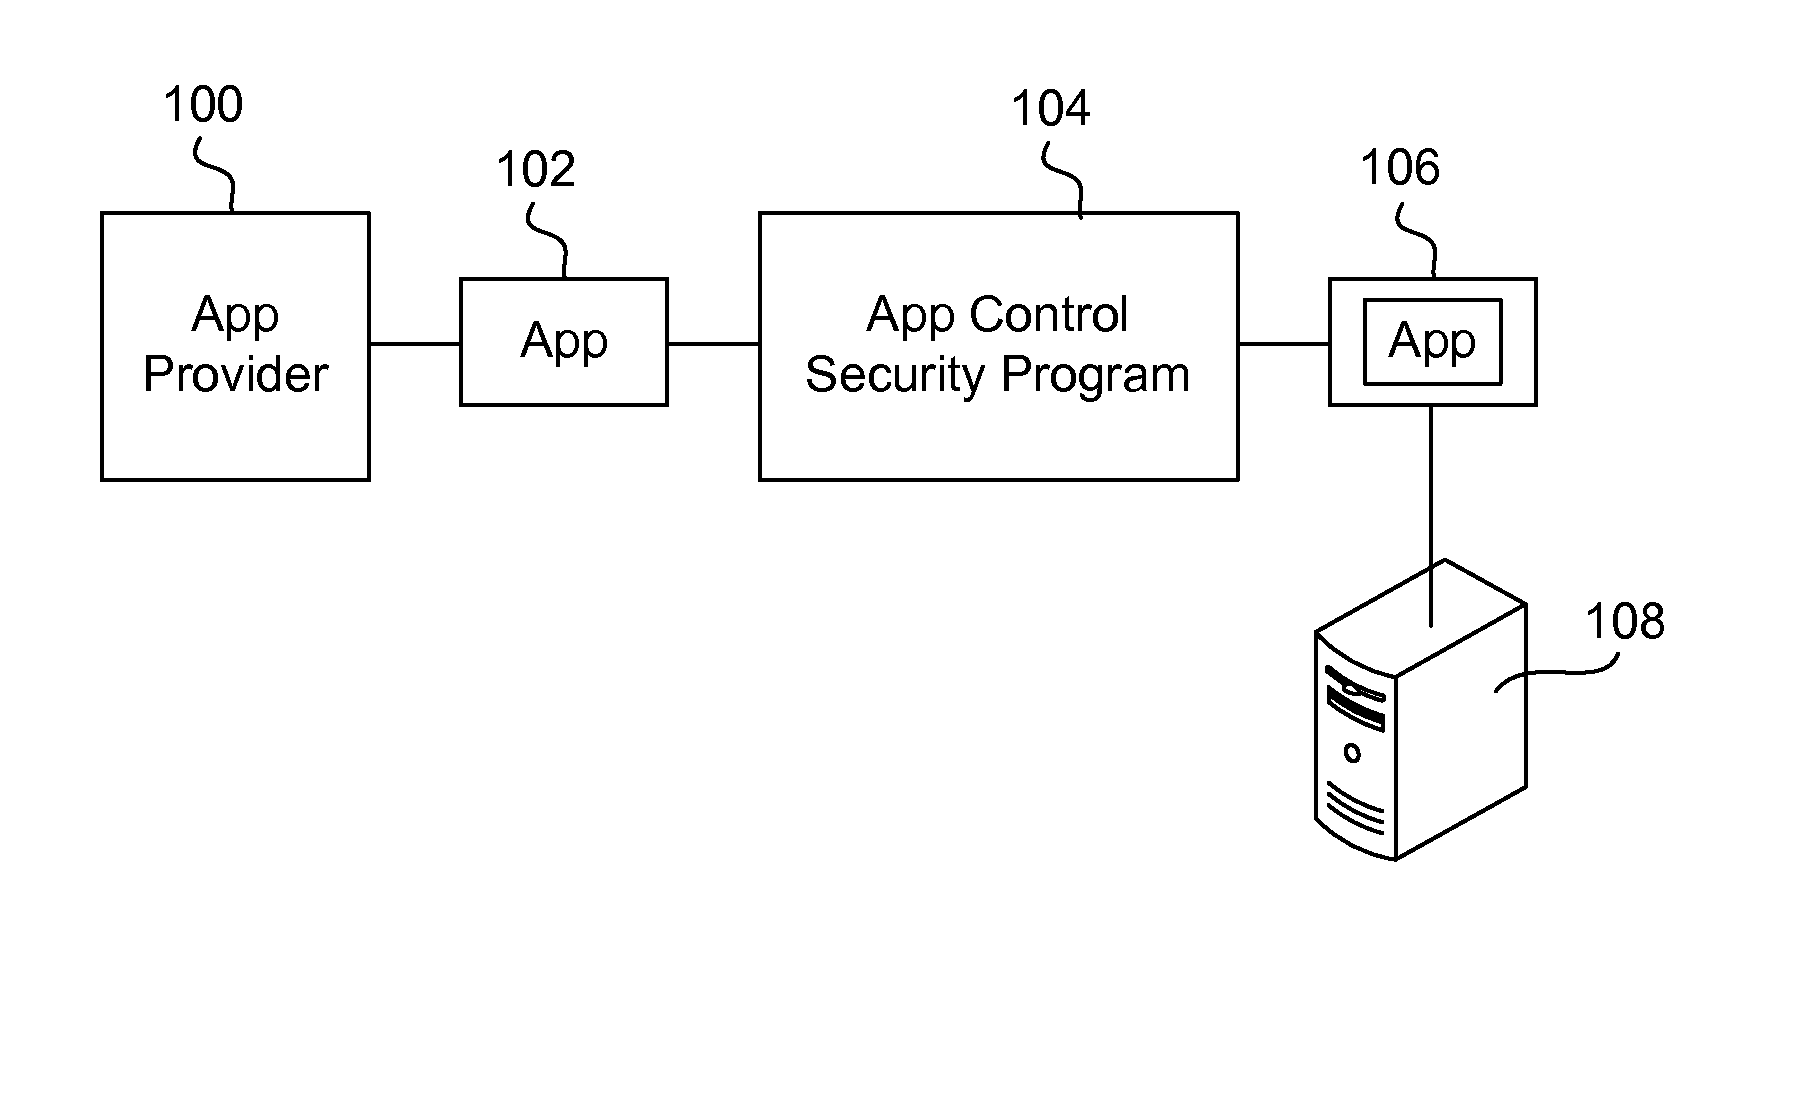 Securing and managing apps on a device